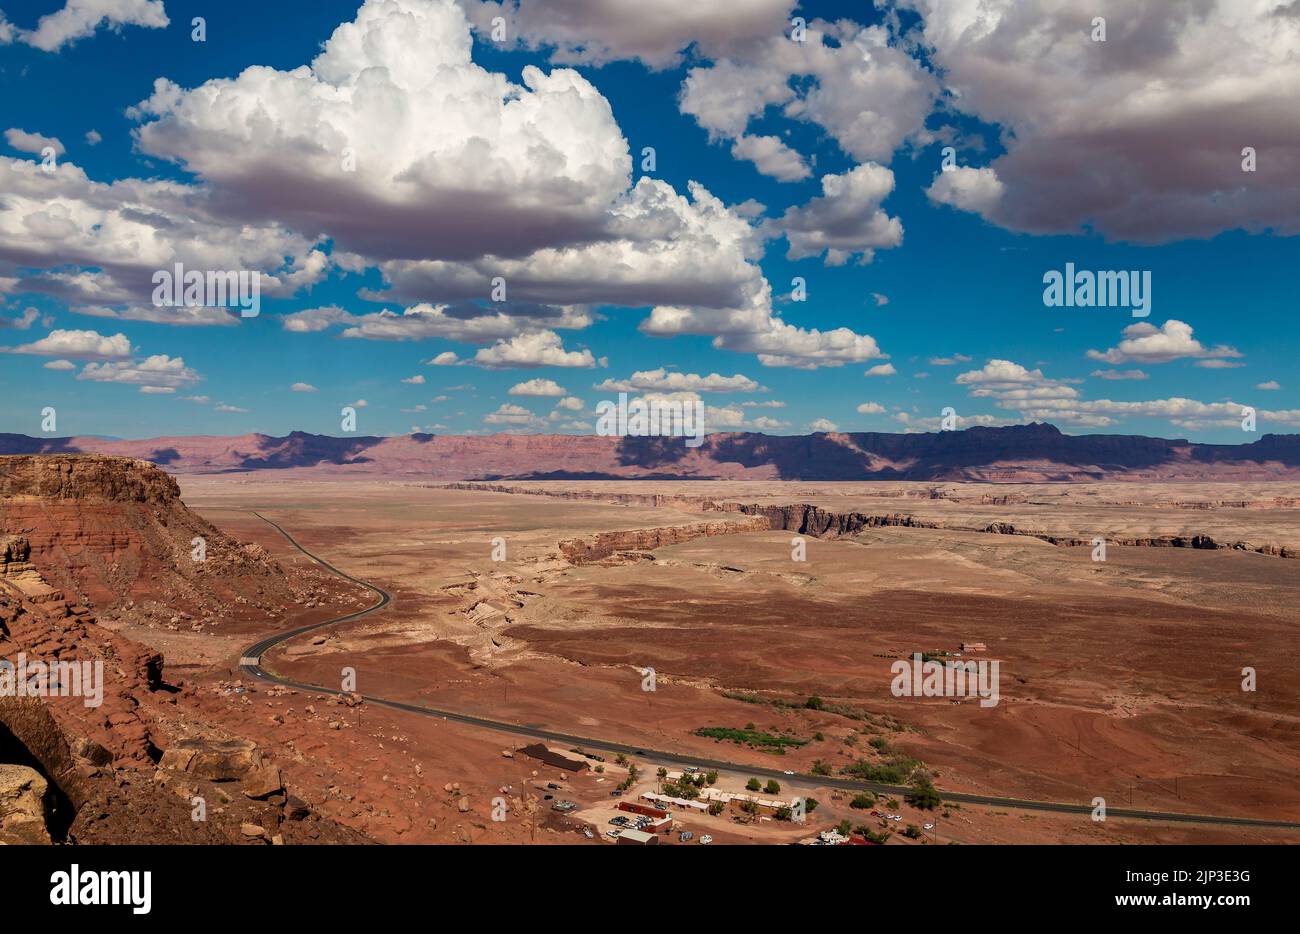 Marble Canyon Arizona con Desert Highway 89a in View Foto Stock